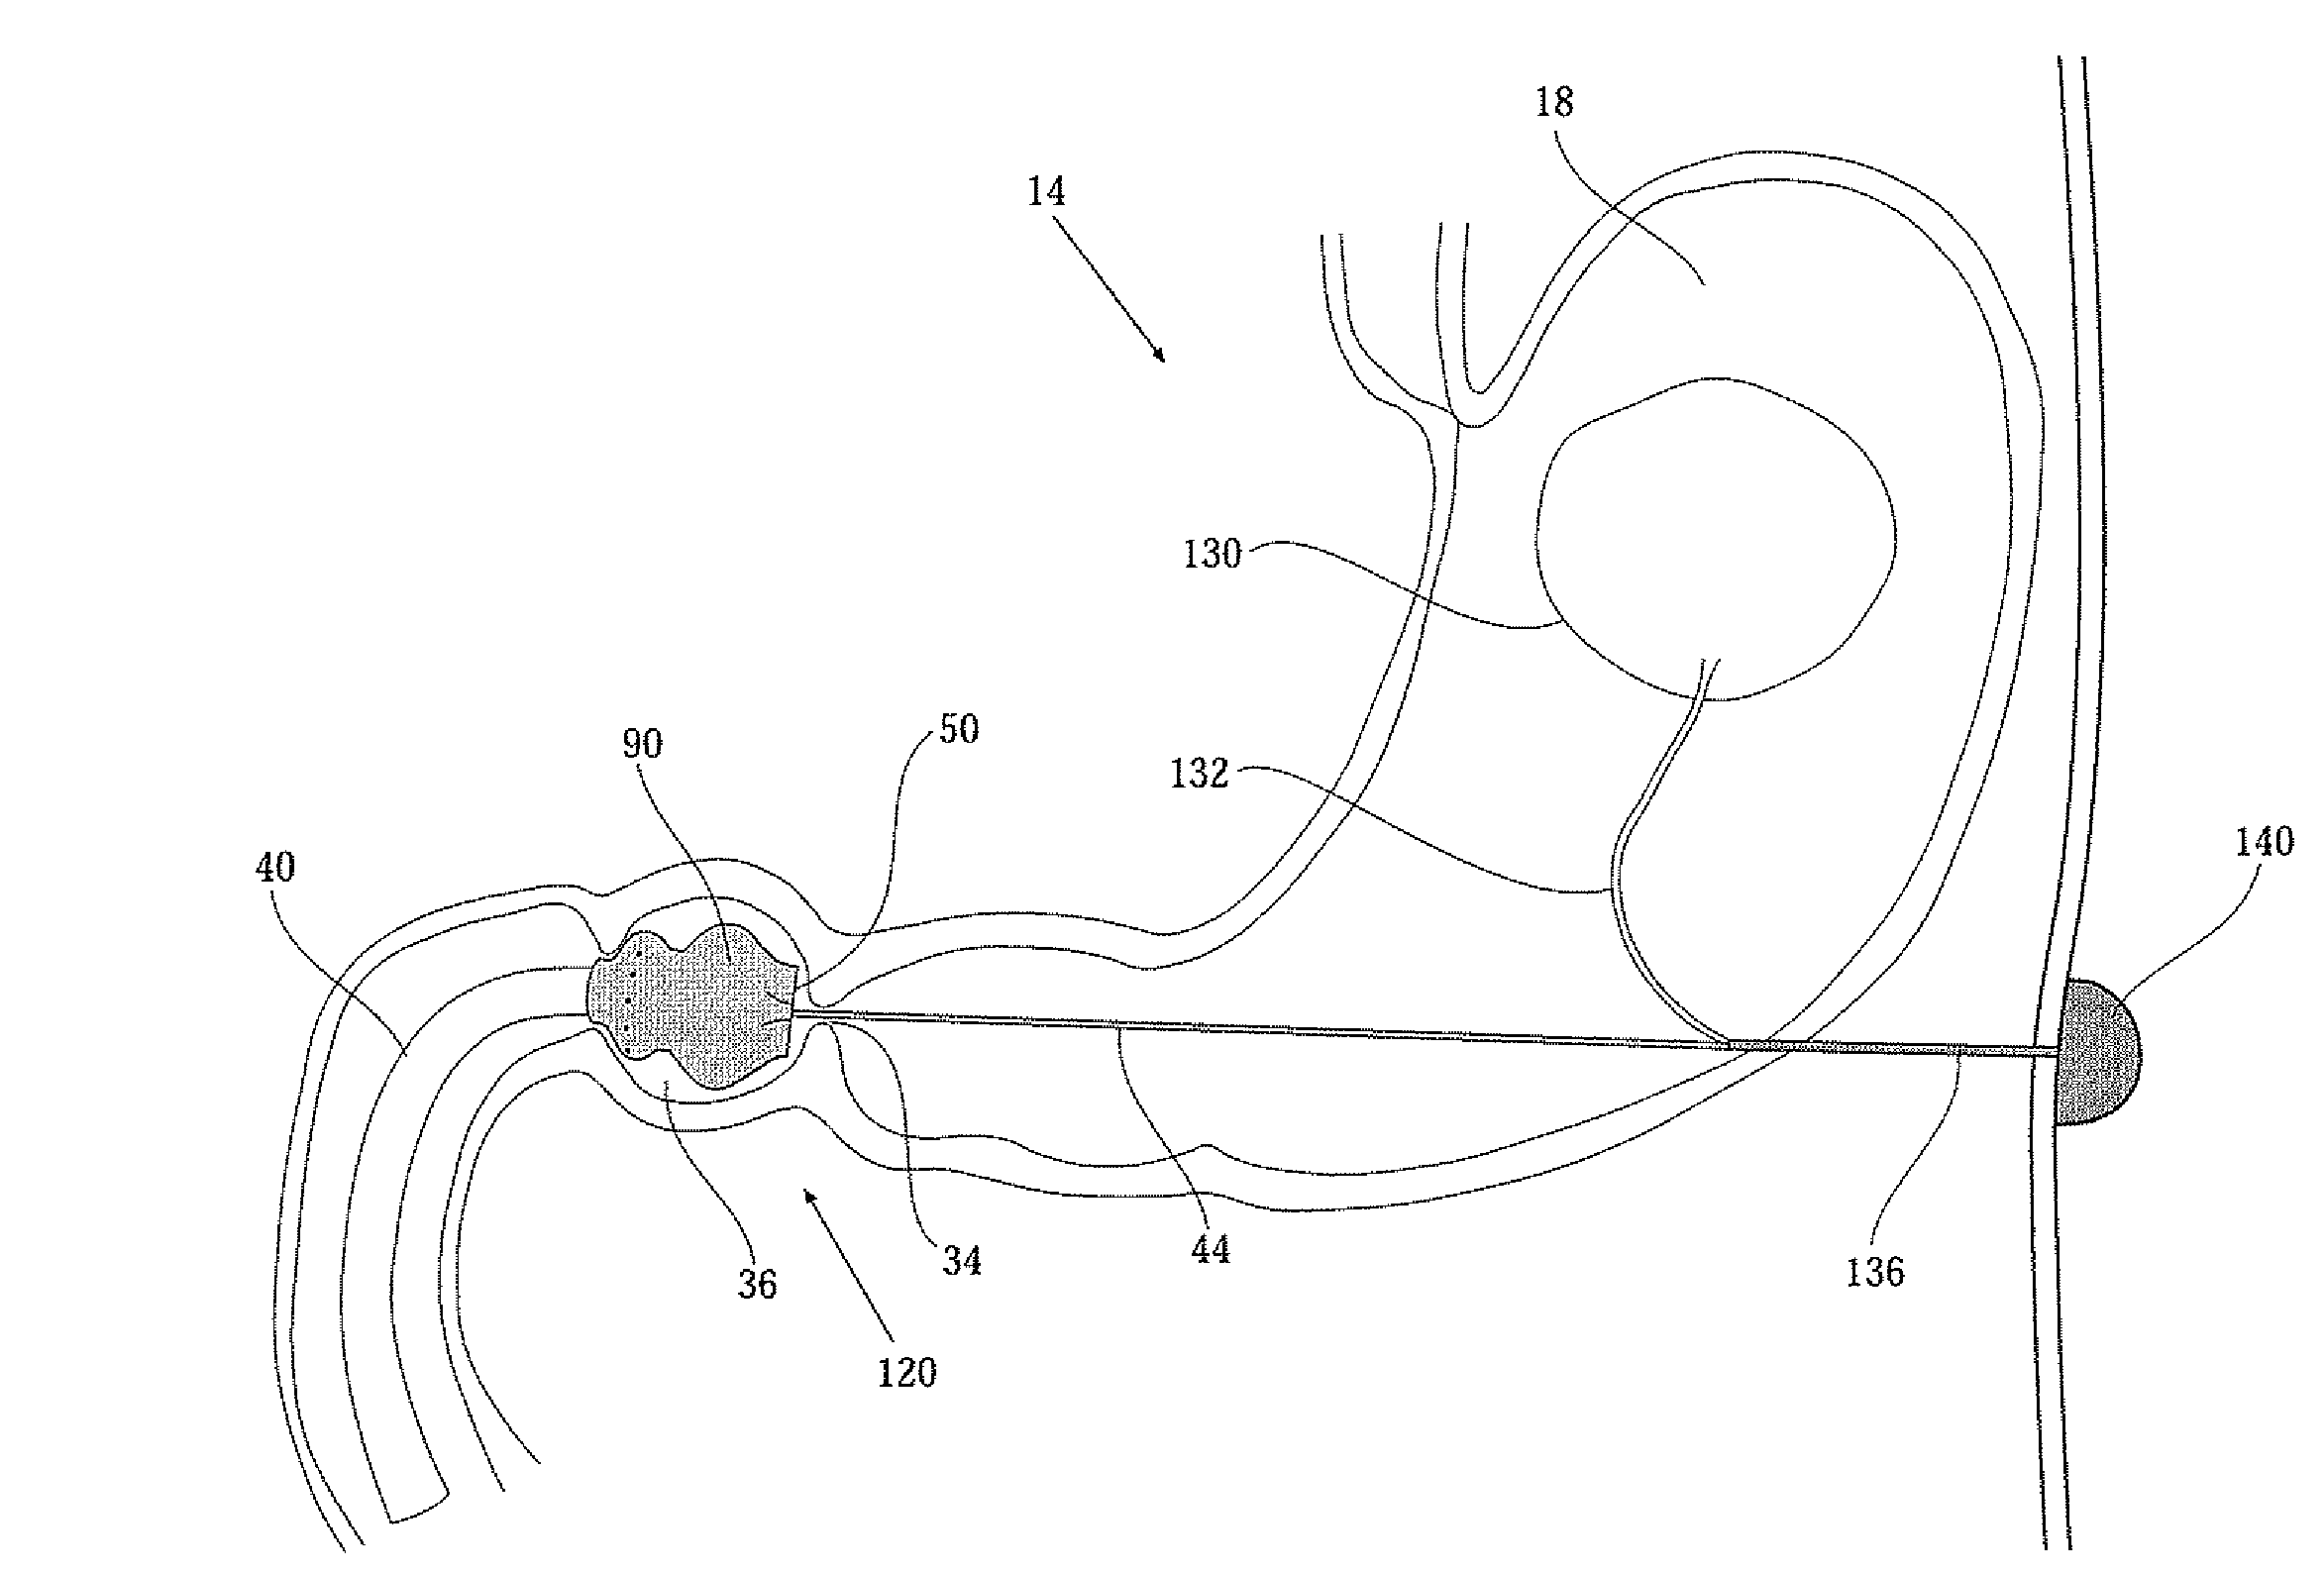 Duodenal liner device